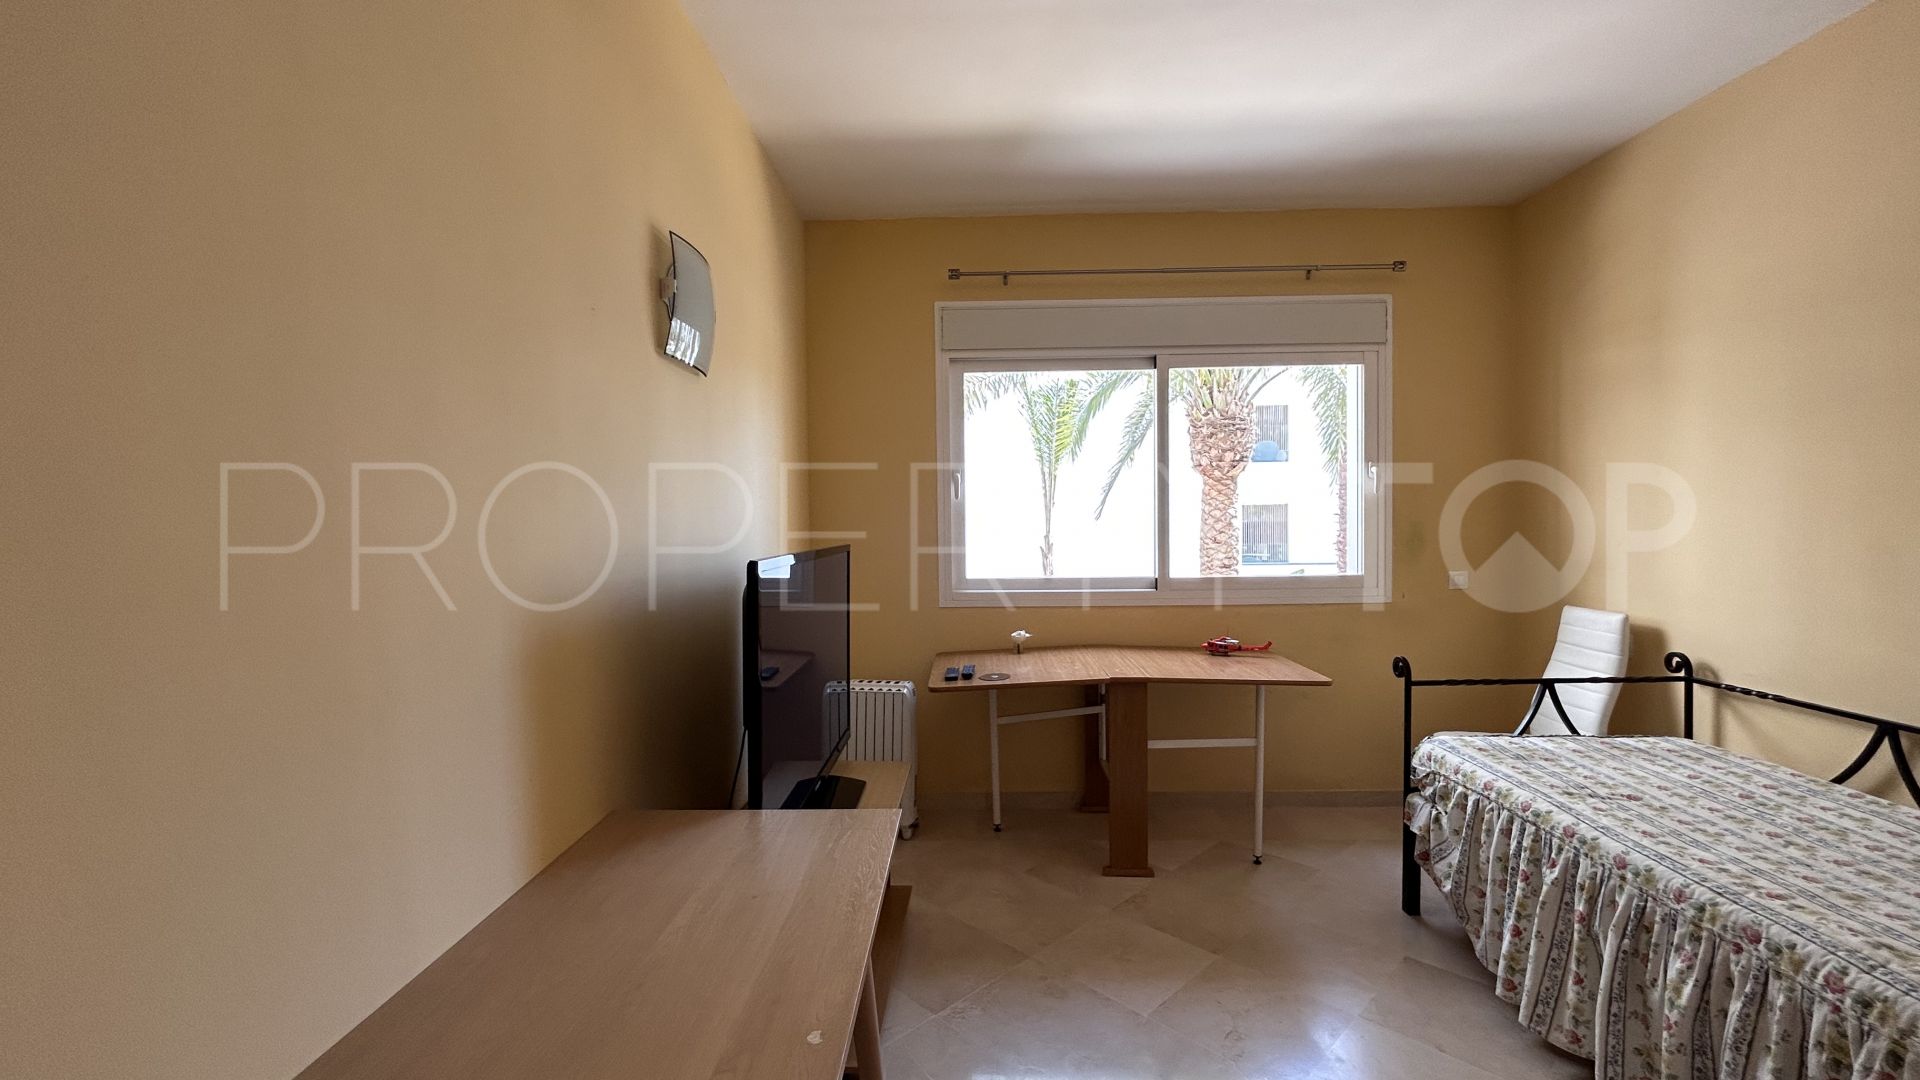 3 bedrooms apartment for sale in Costalita